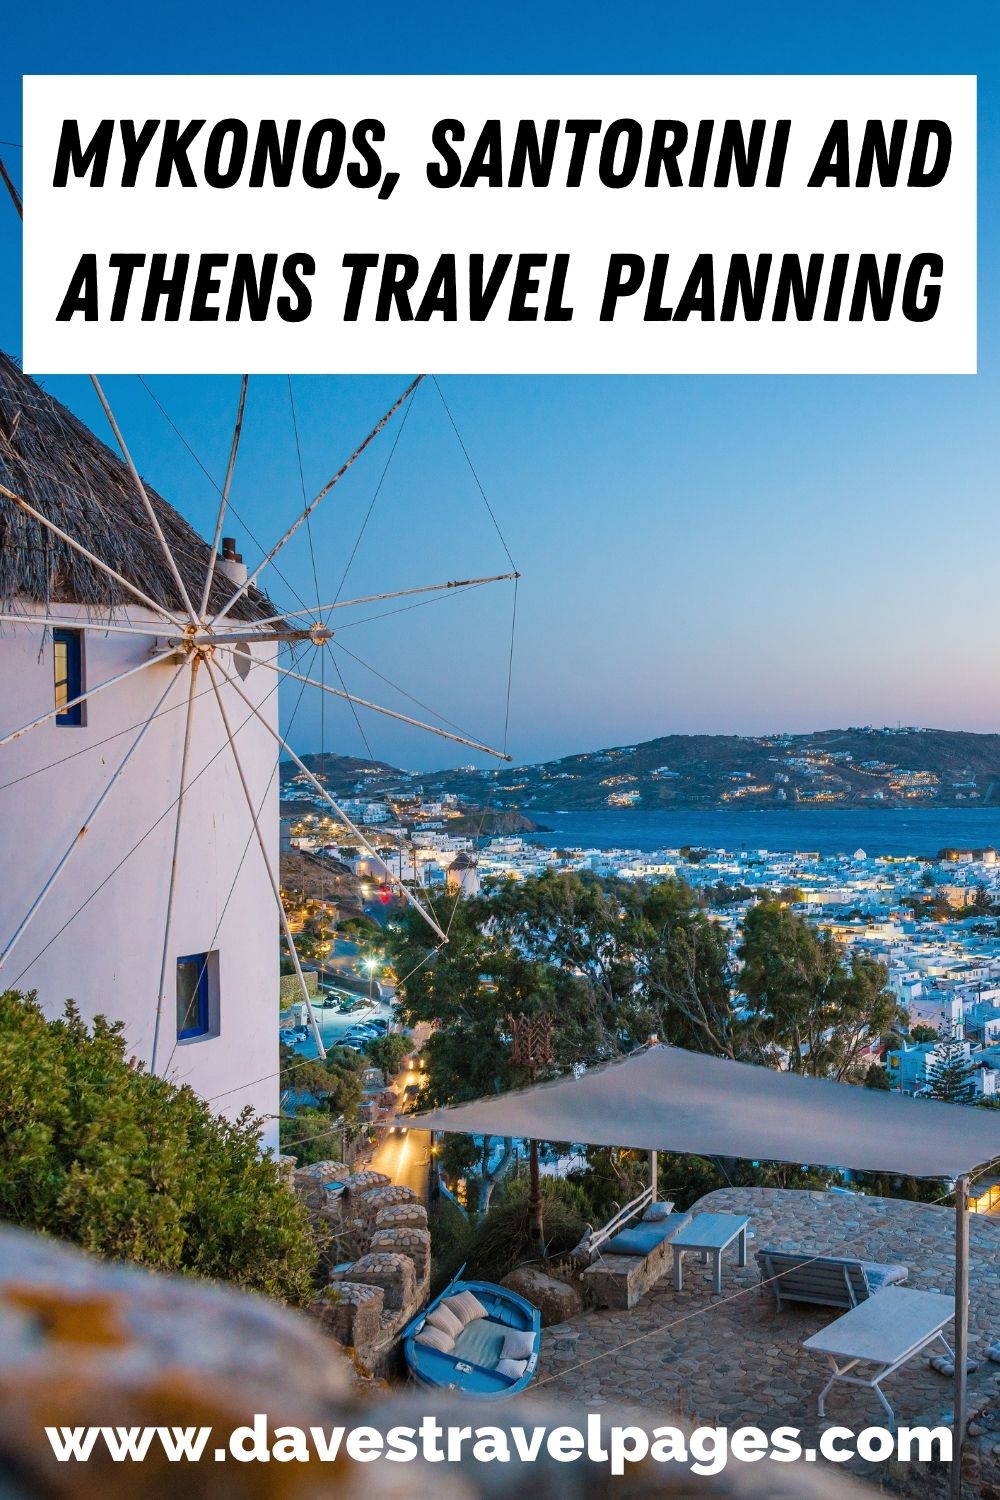 Mykonos, Santorini and Athens travel planning made easy